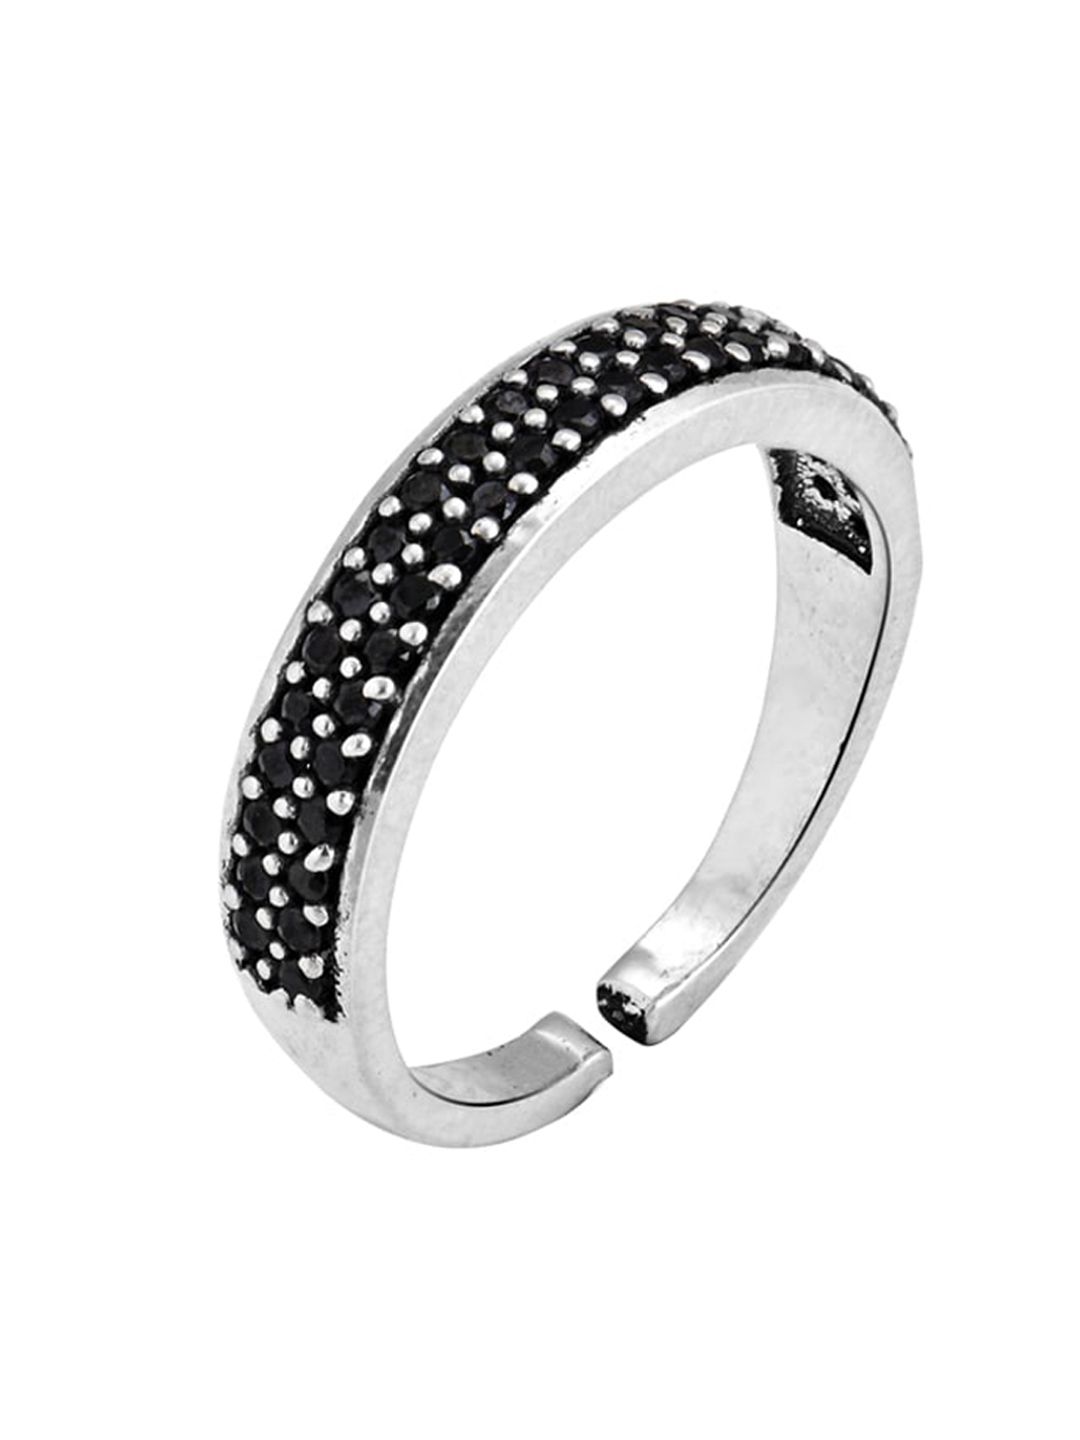 GIVA Rhodium-Plated Black Stones-Studded & Beaded Dotted-Pattern Adjustable Finger Ring Price in India